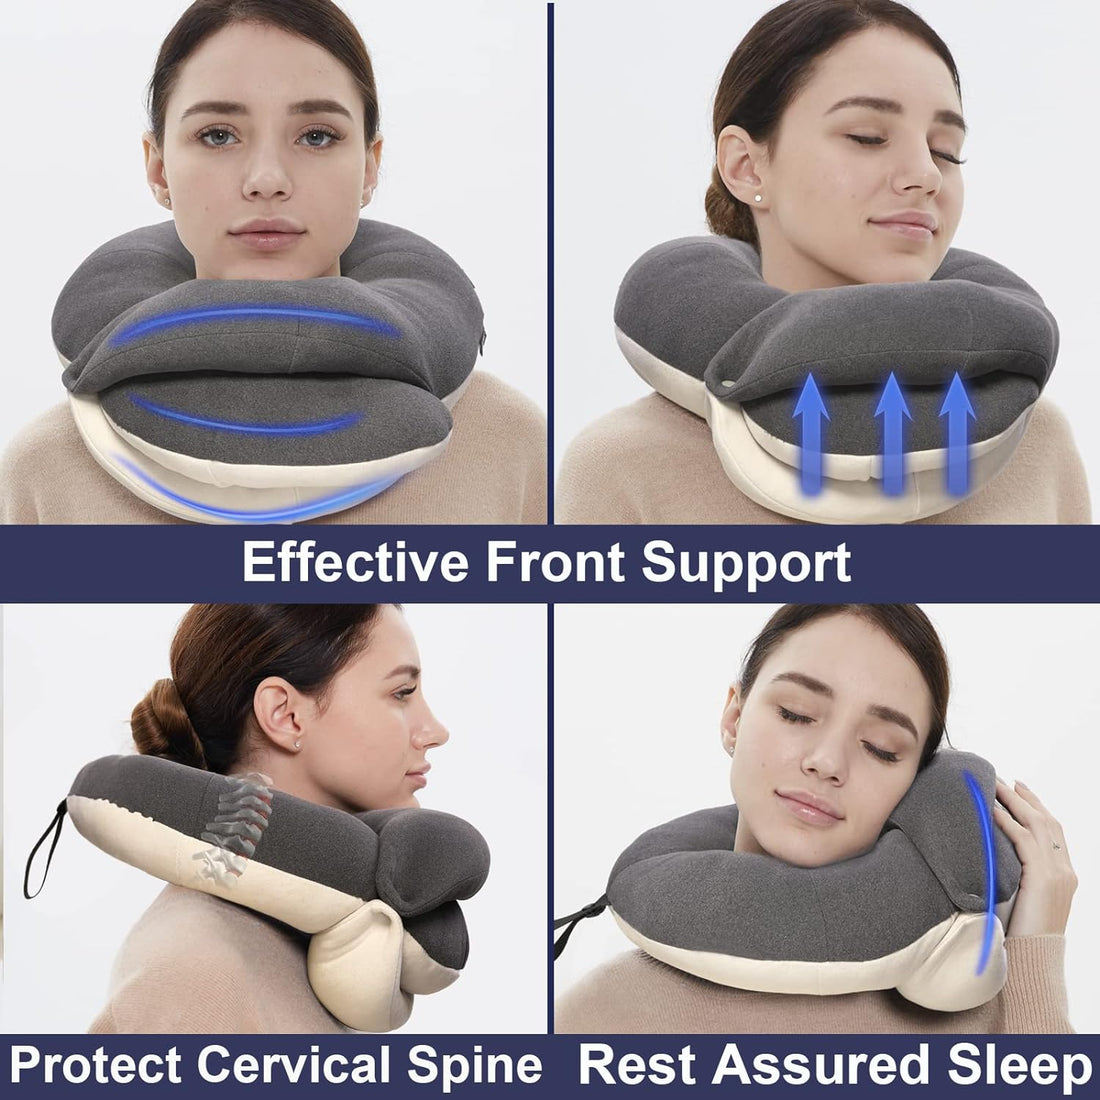 BUYUE Travel Neck Pillows for Airplanes, 360° Head Support Sleeping Essentials for Long Flight , Skin-Friendly & Breathable, Kit with 3D Contoured Eye Mask, Earplugs and Storage Bag (Aldult, Grey)